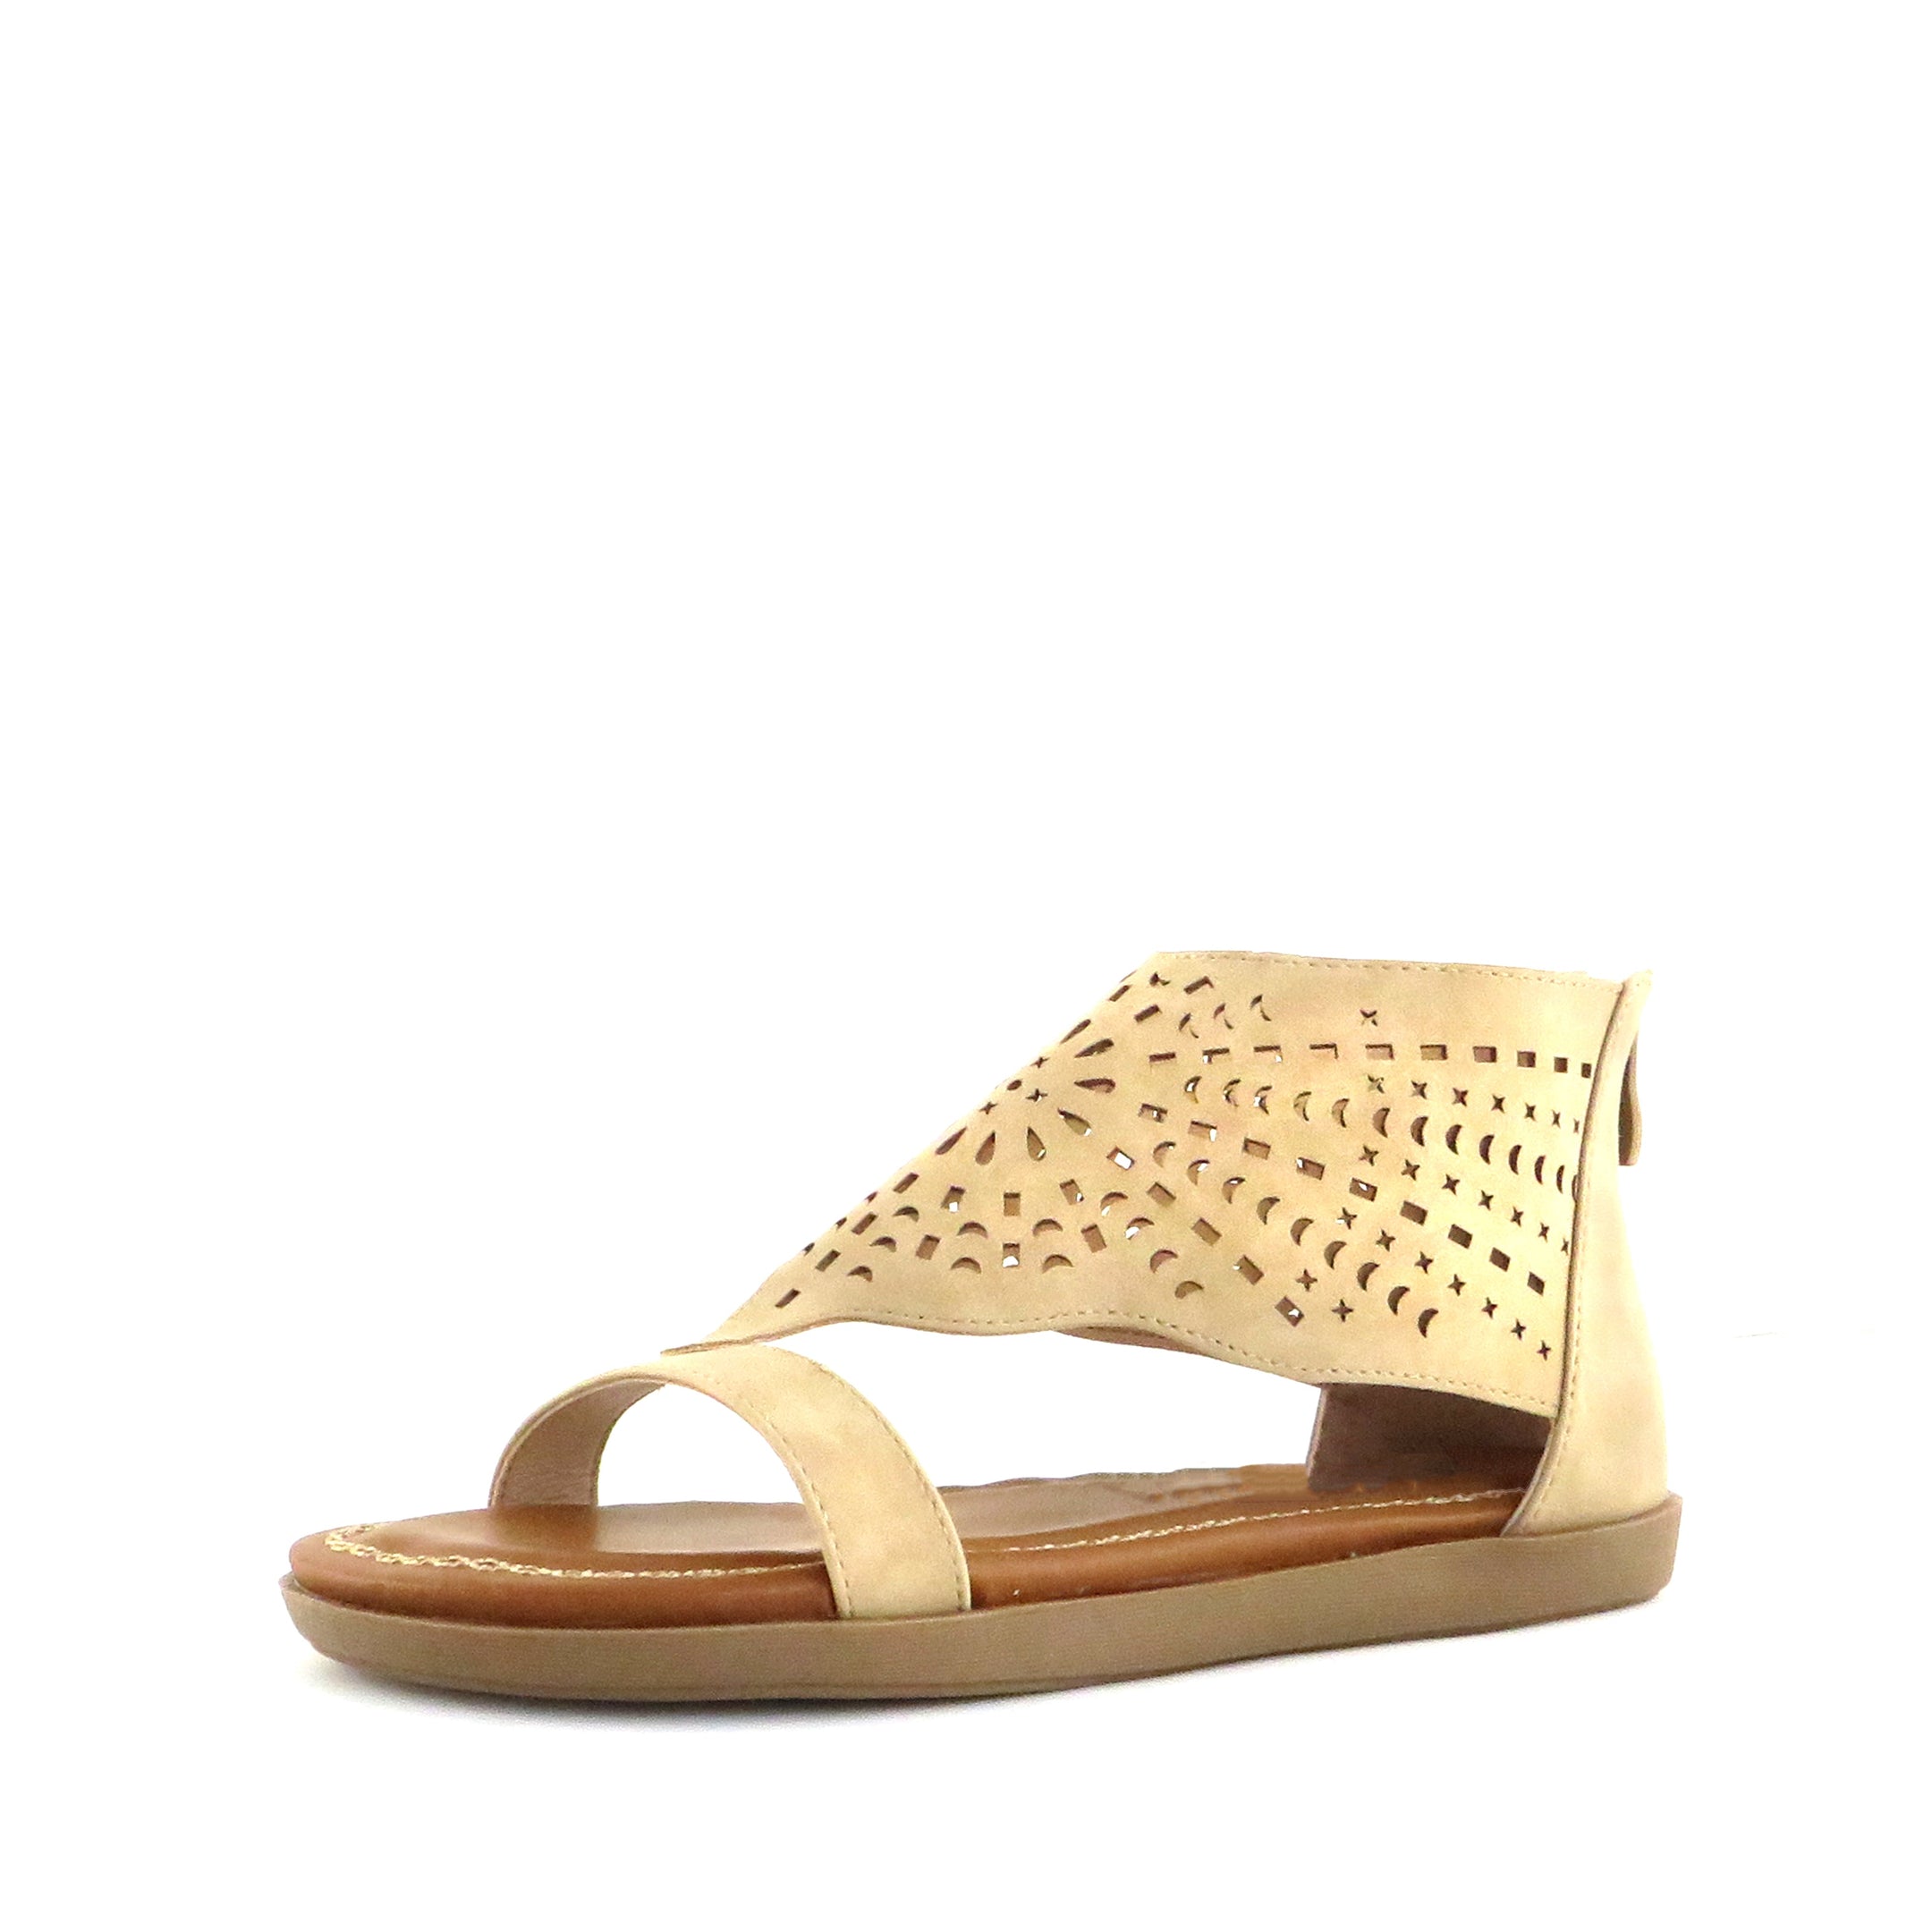 Buy Women's Crissy Natural Perforated Sandal by Nest Shoes